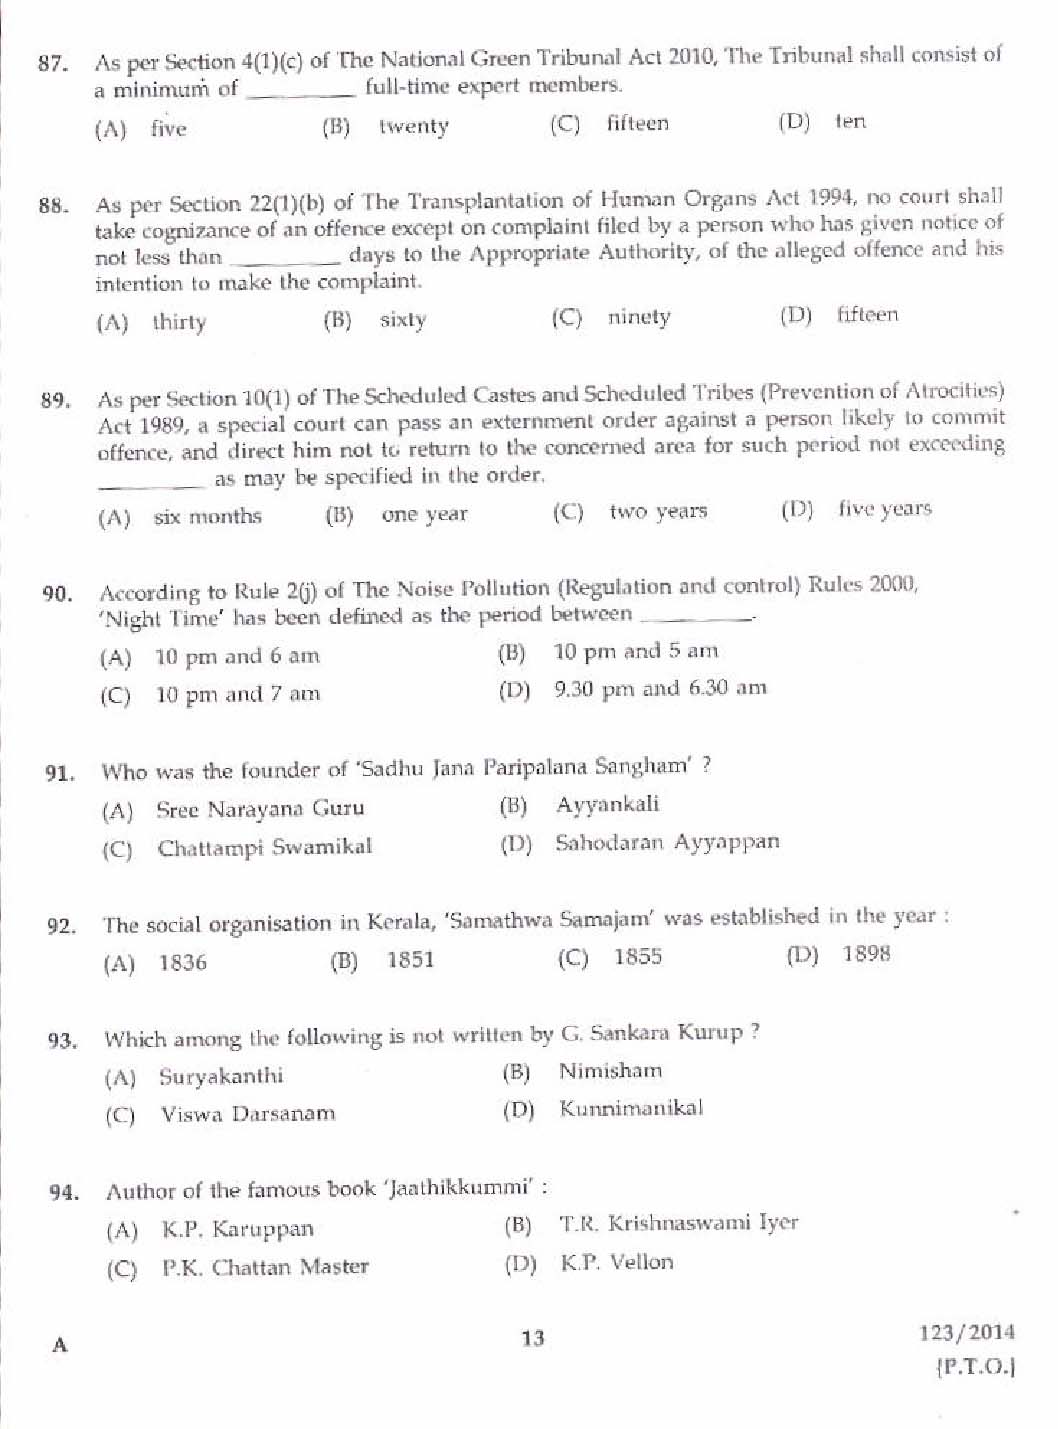 KPSC Lecturer in Political Science Exam 2014 Code 1232014 11